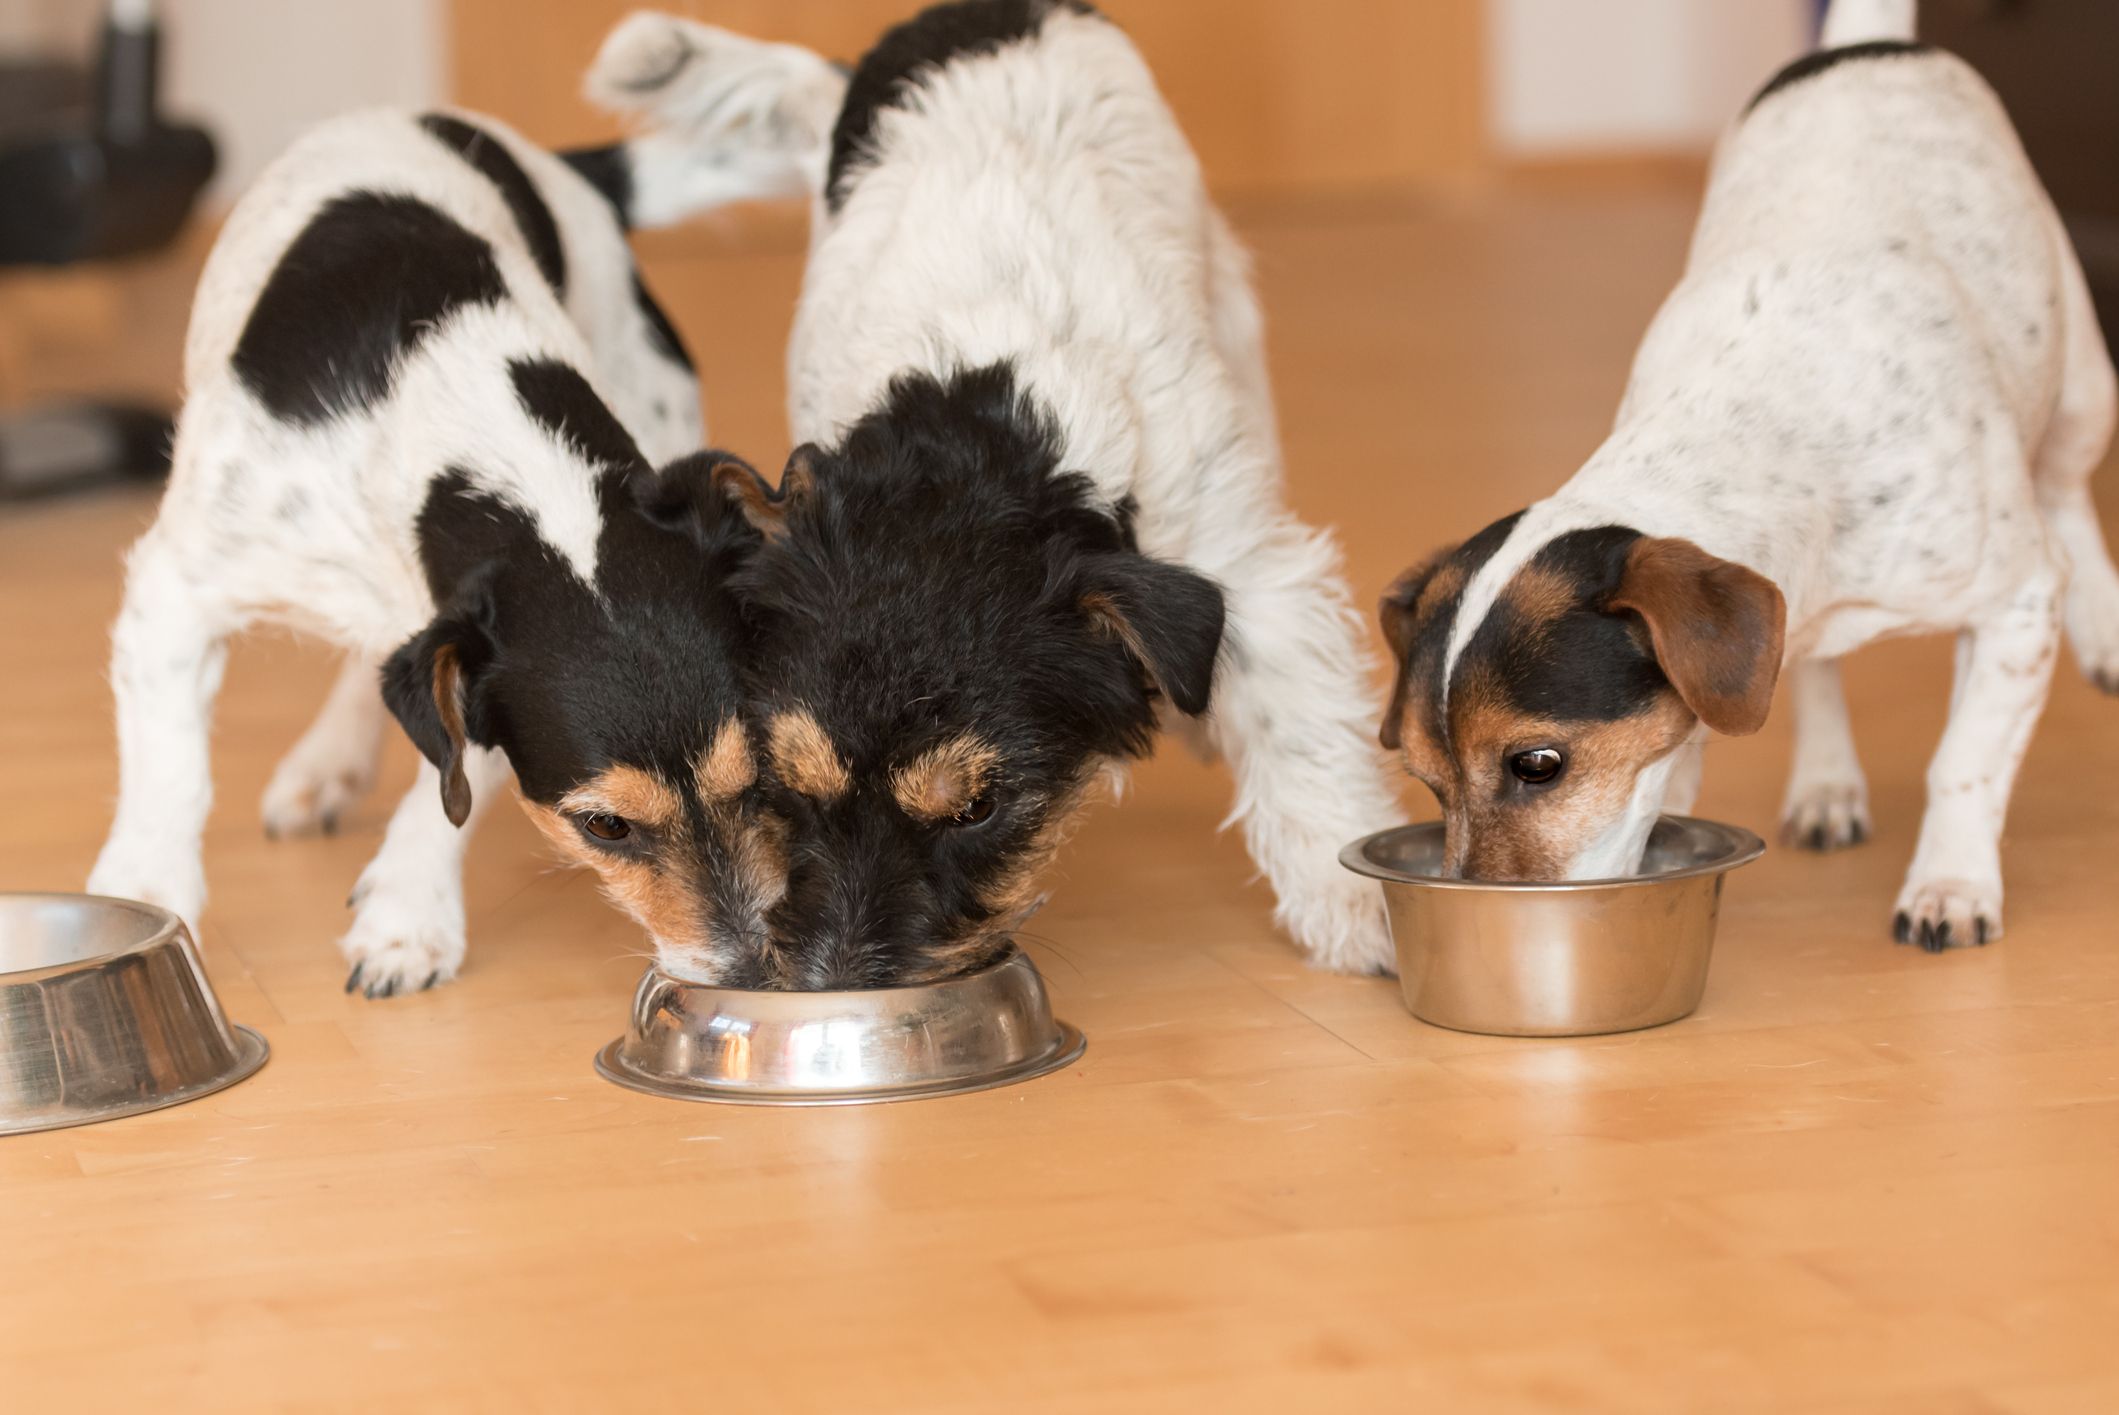 What's the Ideal Feeding Schedule for Dogs? - Whole Dog Journal